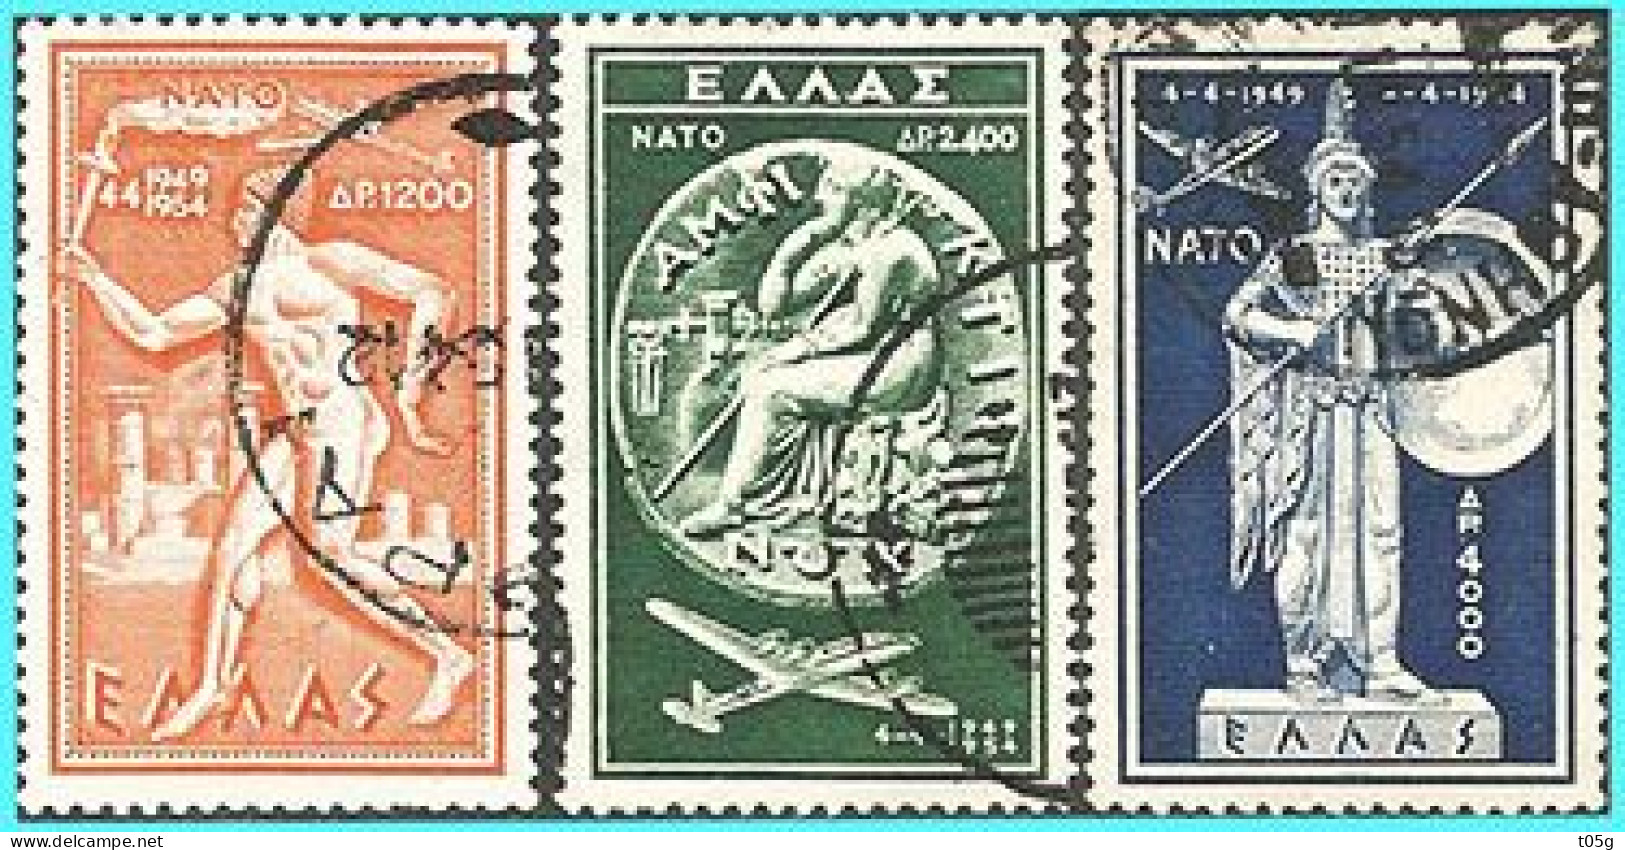 GREECE- GRECE - HELLAS 1954: Airpost Stamps:  " NATO" Compl. Set Used - Used Stamps